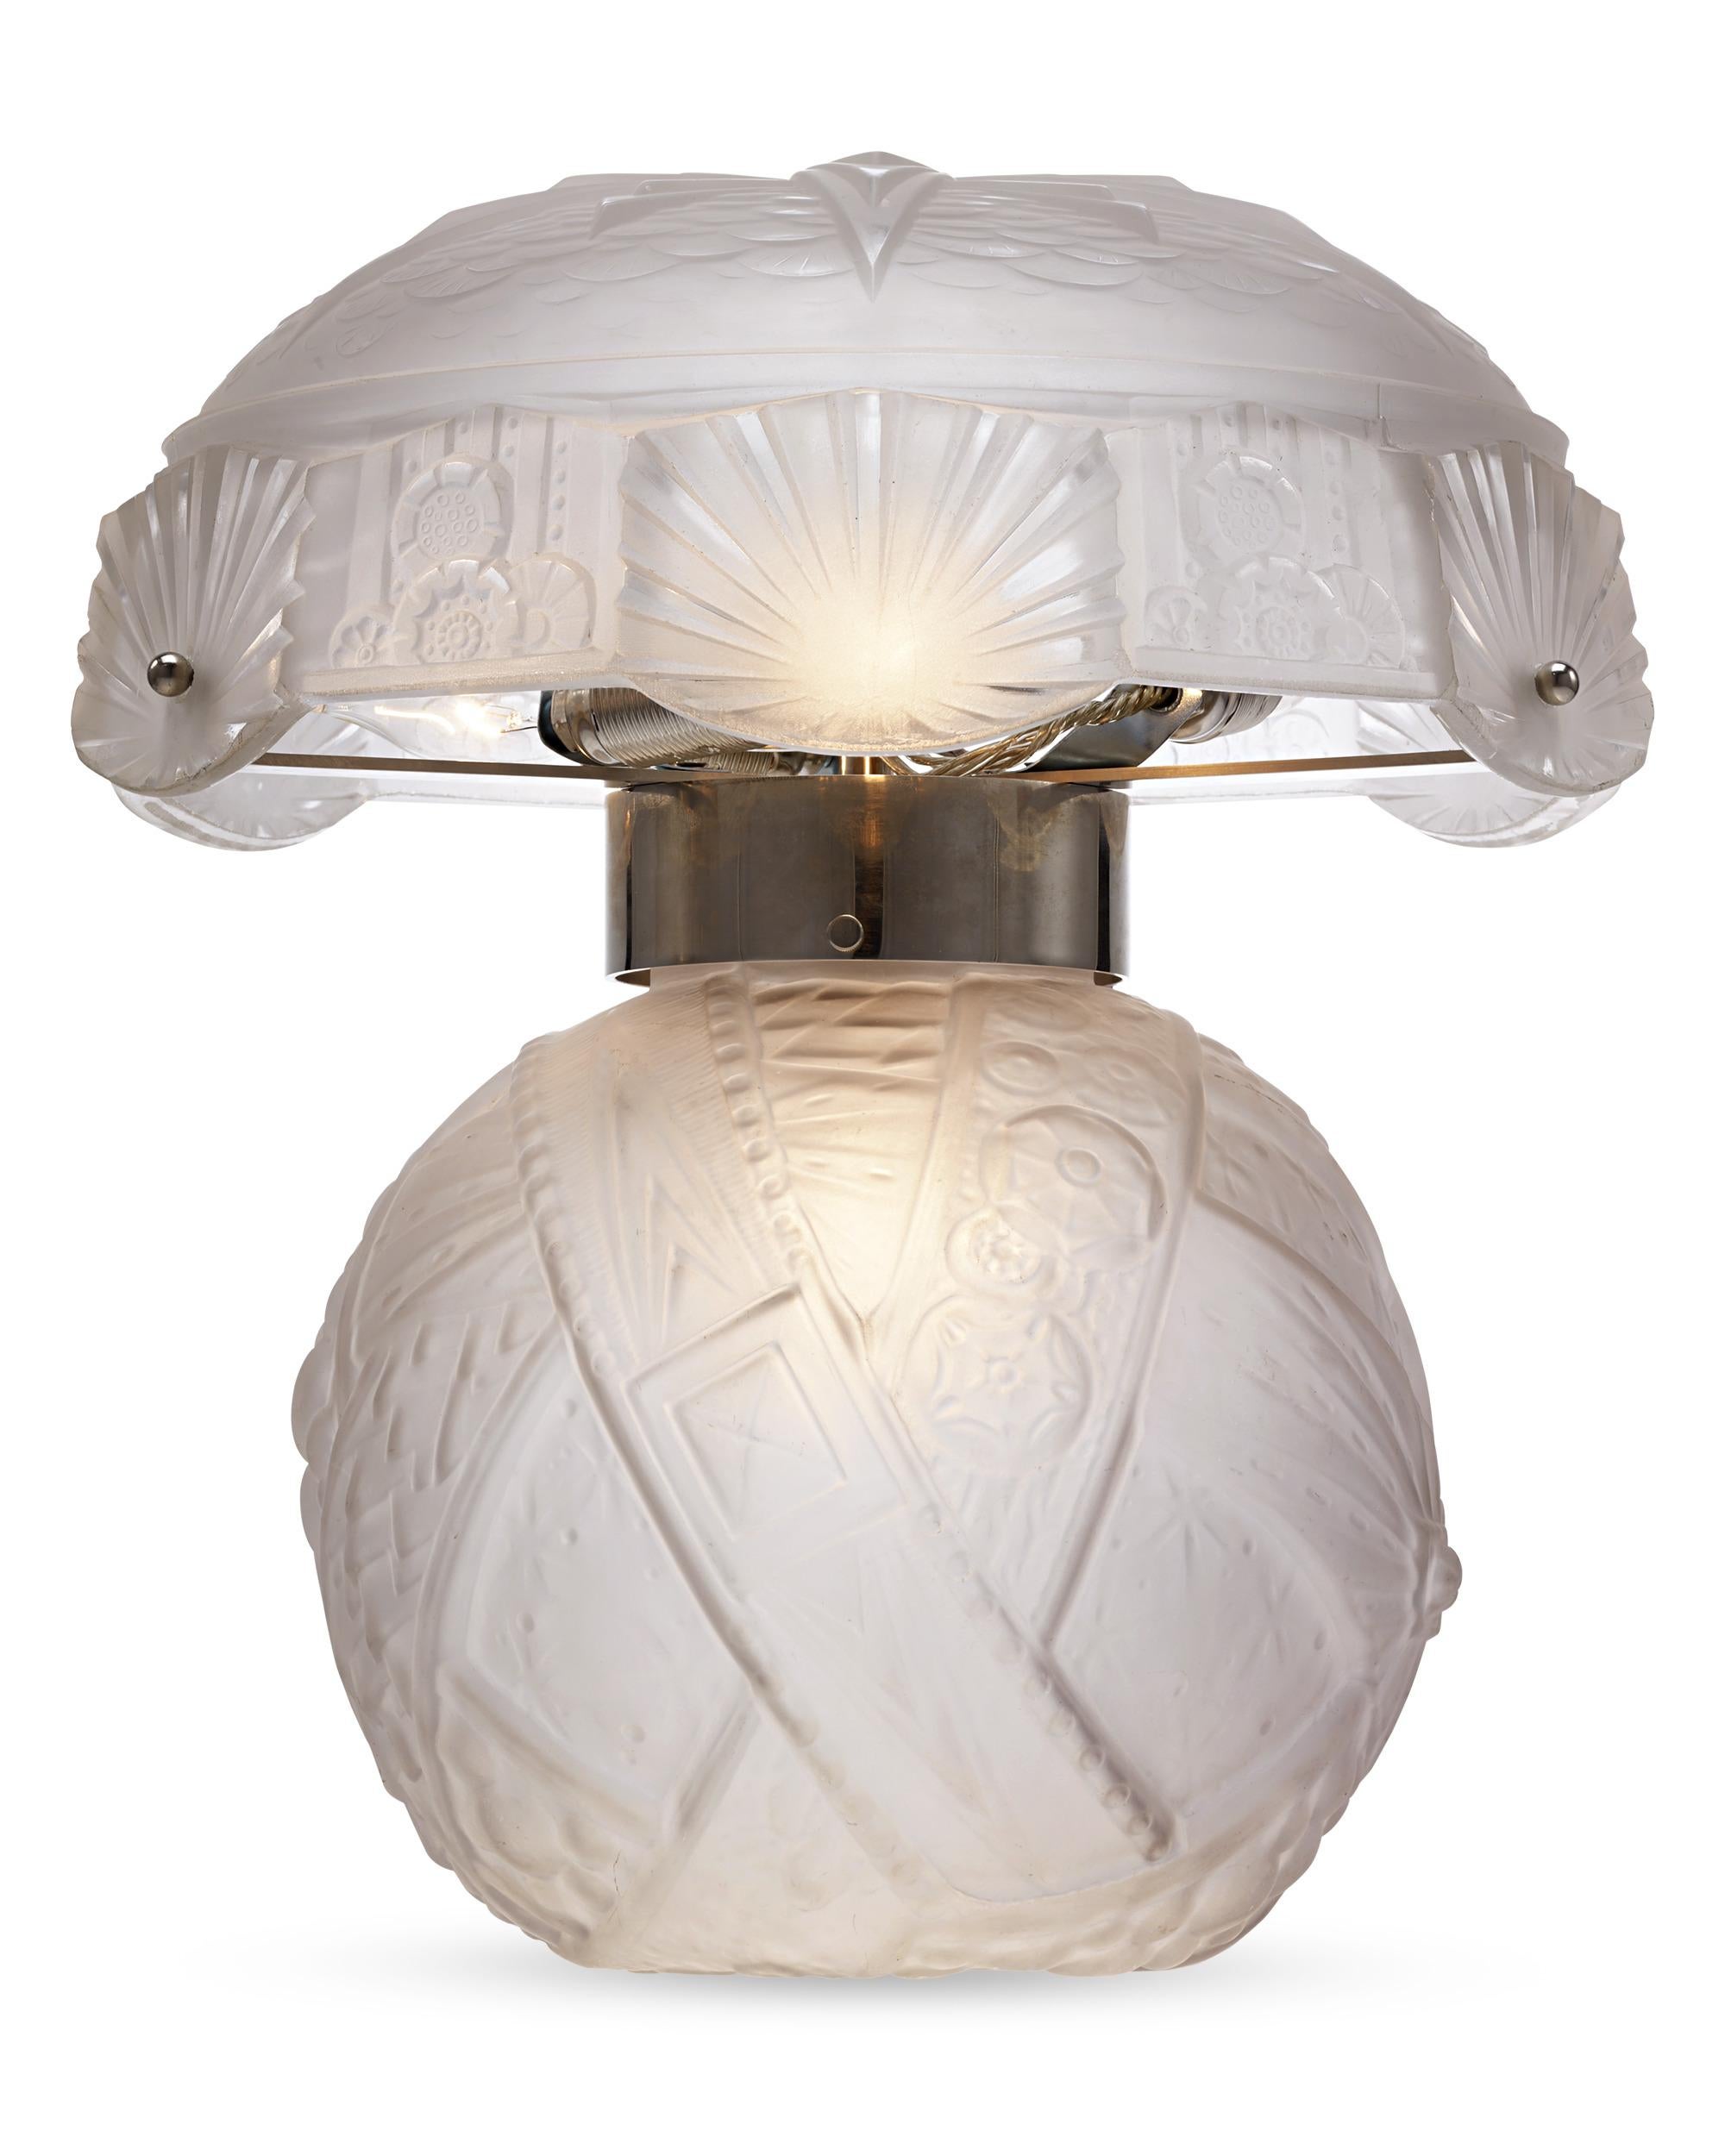 Exceptional in their artistry, these lamps from acclaimed French artisans Muller Frères cast an alluring glow reminiscent of soft moonlight. The base and shade are crafted of exquisitely etched frosted glass with stylized geometric patterns of